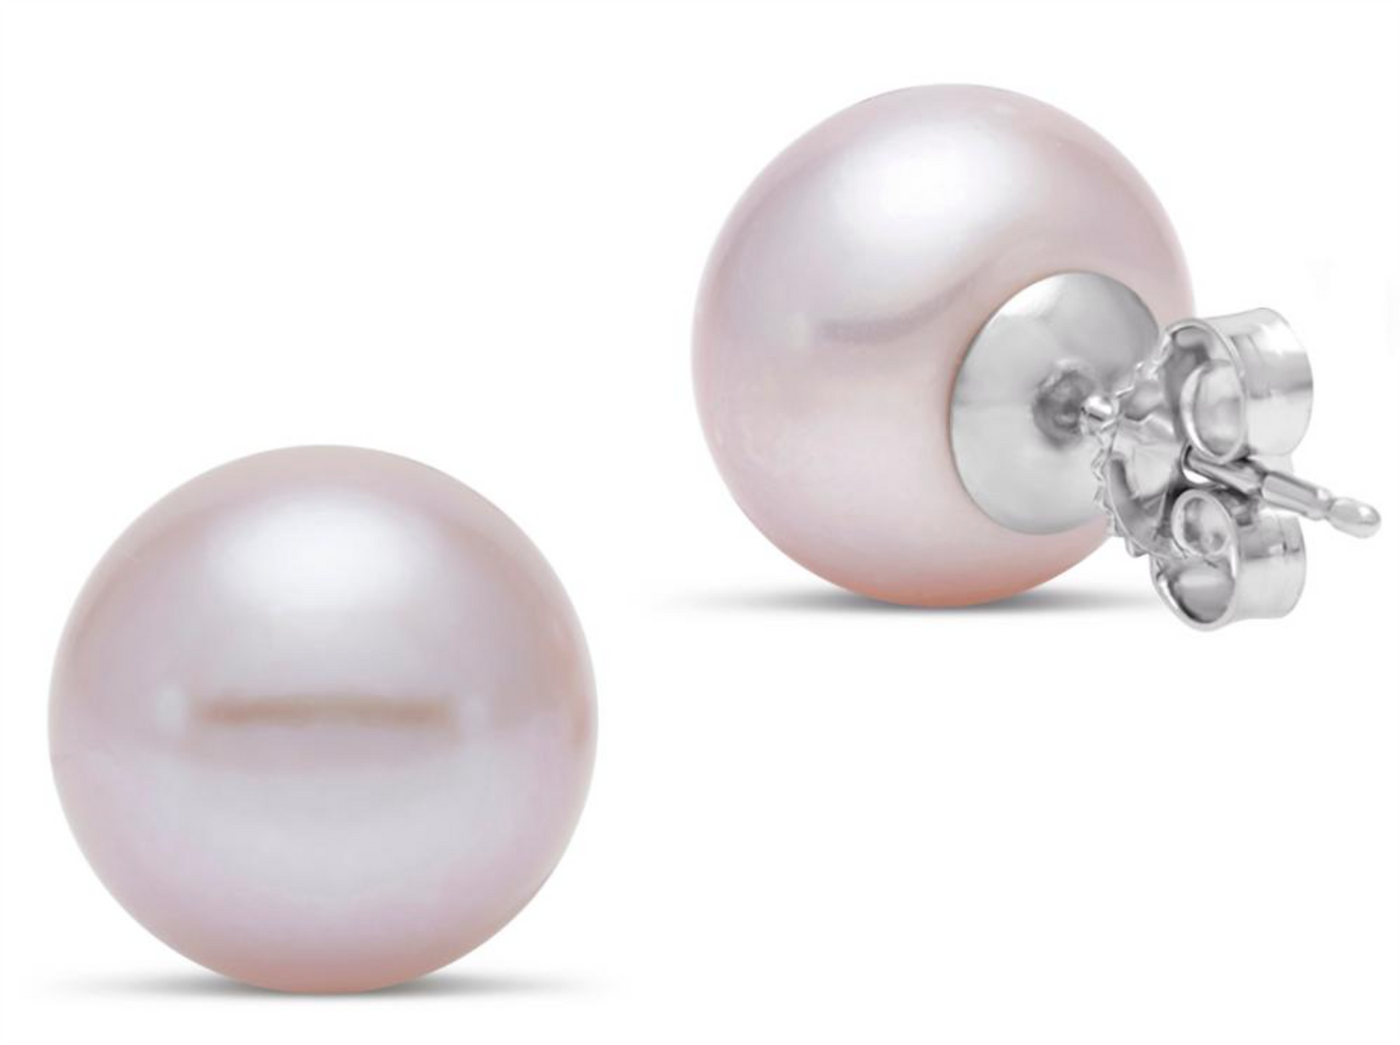 14K White Gold Stud Style Earrings Featuring Pink Freshwater Pearls